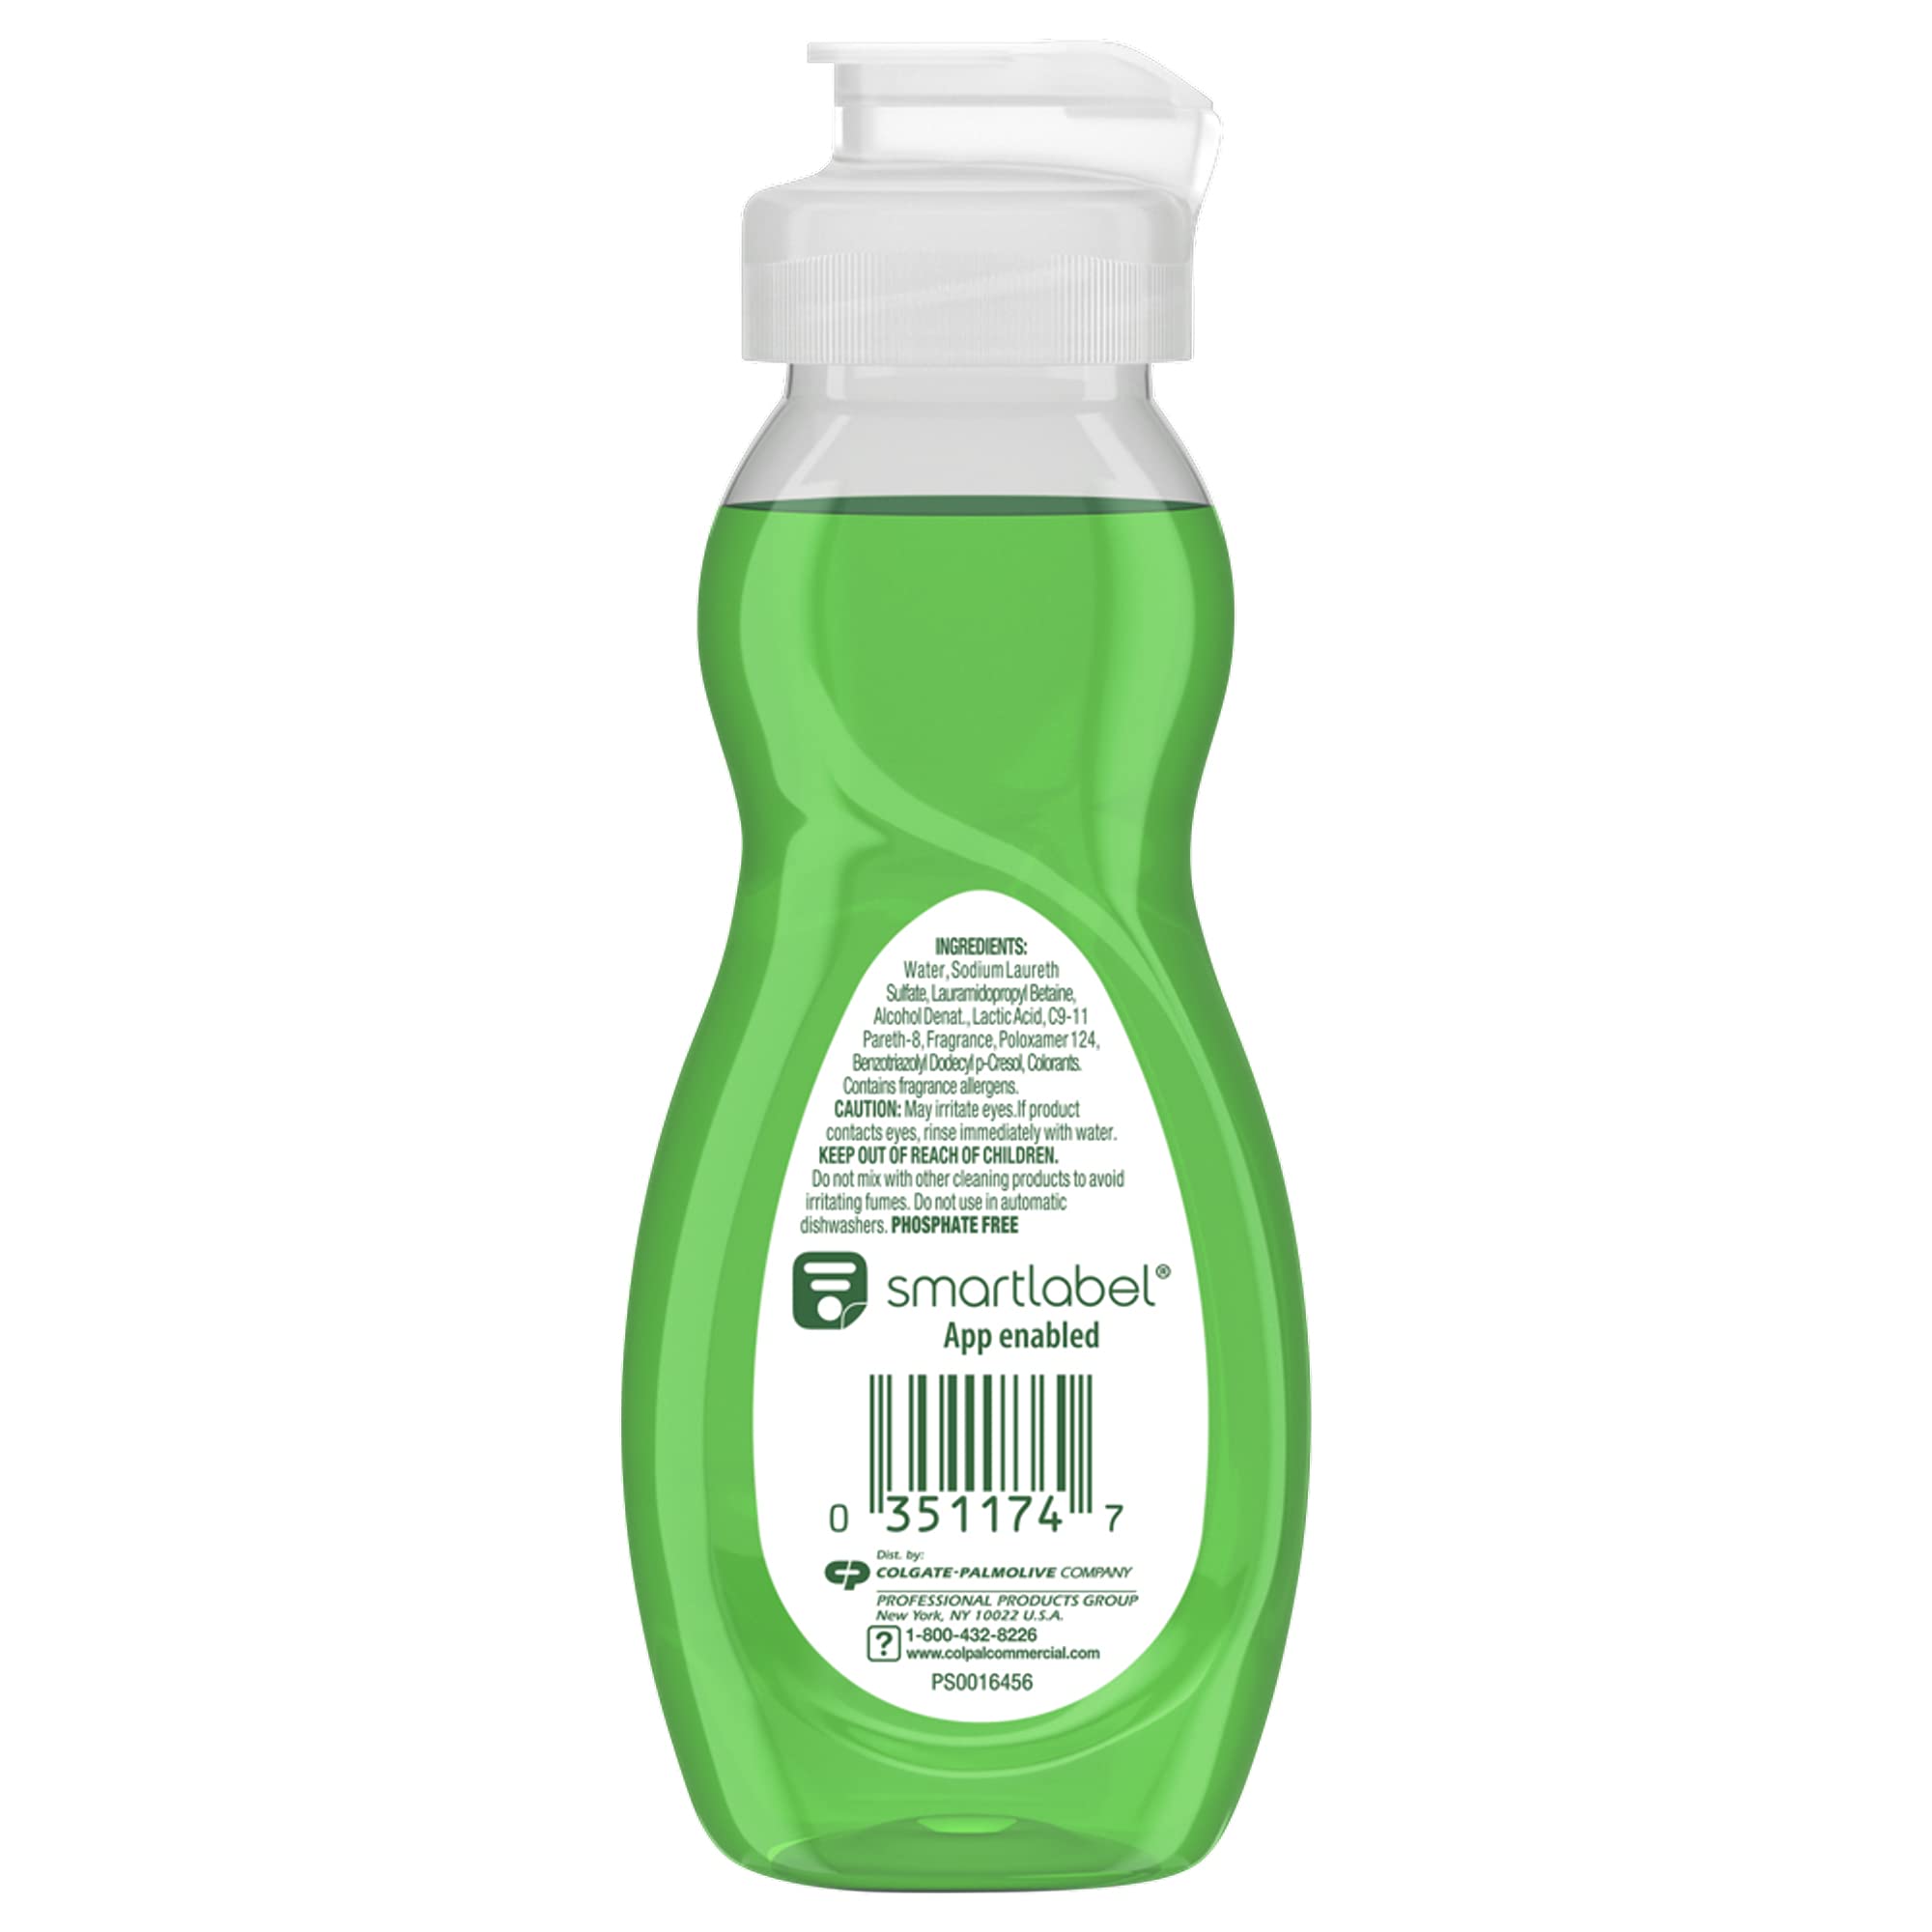 PALMOLIVE Dishwashing Liquid, Travel Dish Soap, Original Scent, Green, 3 Fluid Ounce Bottle (Case of 72) - Total of 216 Fluid Ounces - Dishwashing Liquid - Kitchen Soap & Cleaning Supplies